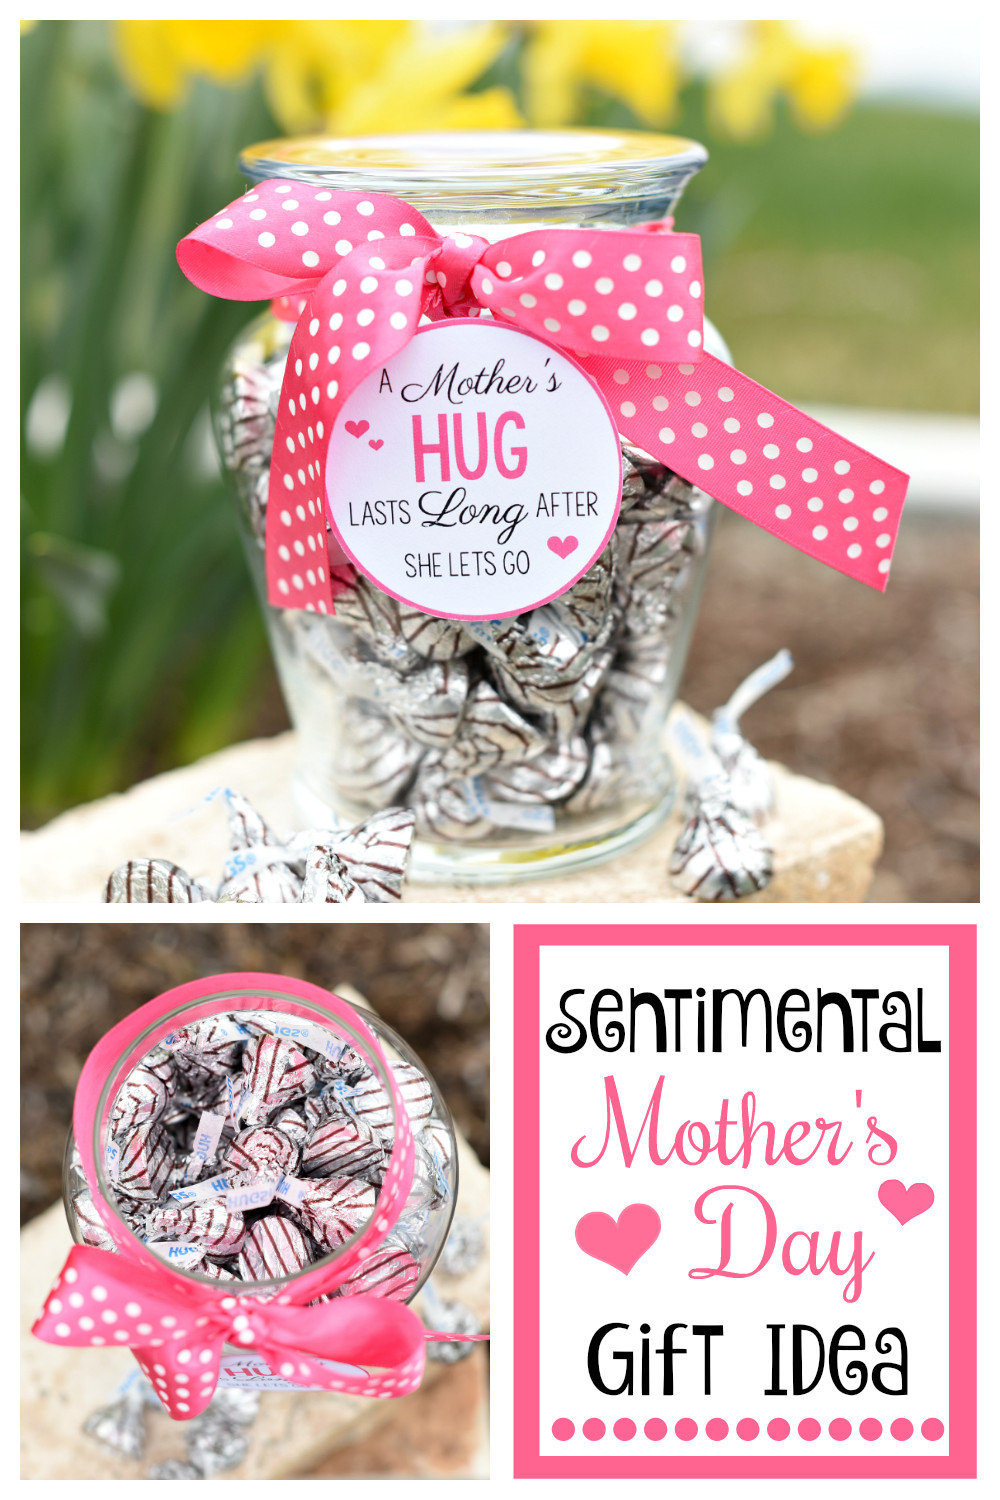 Simple Mother'S Day Gift Ideas
 Sentimental Gift Ideas for Mother s Day – Fun Squared